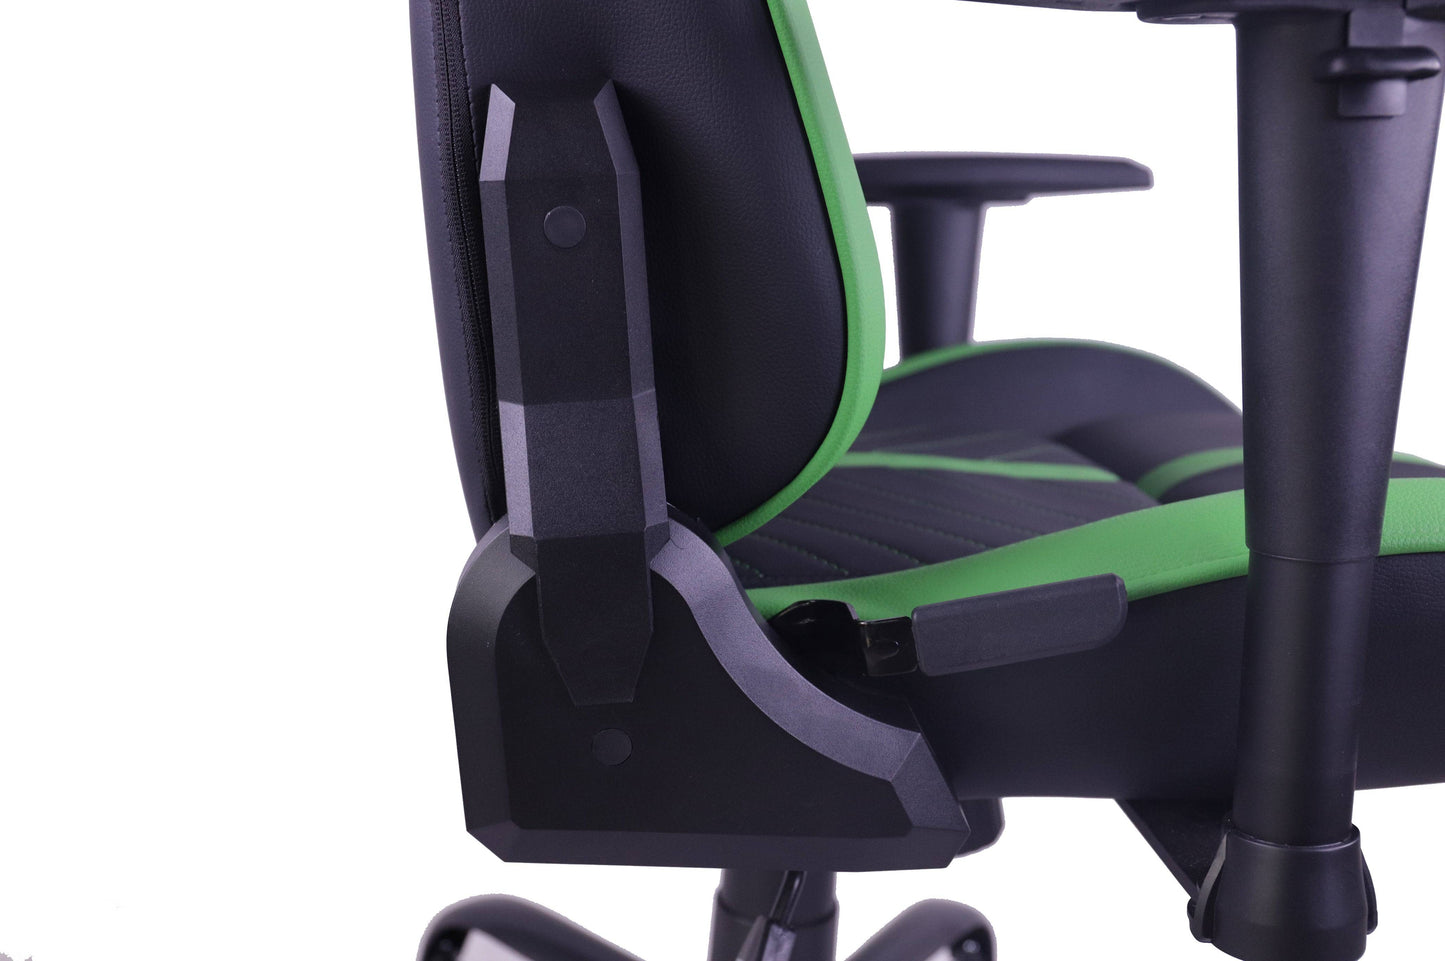 COOLBABY KW-G6322: Ultimate Gaming Chair with 180° Recliner, 2D Adjustable Armrests - COOLBABY